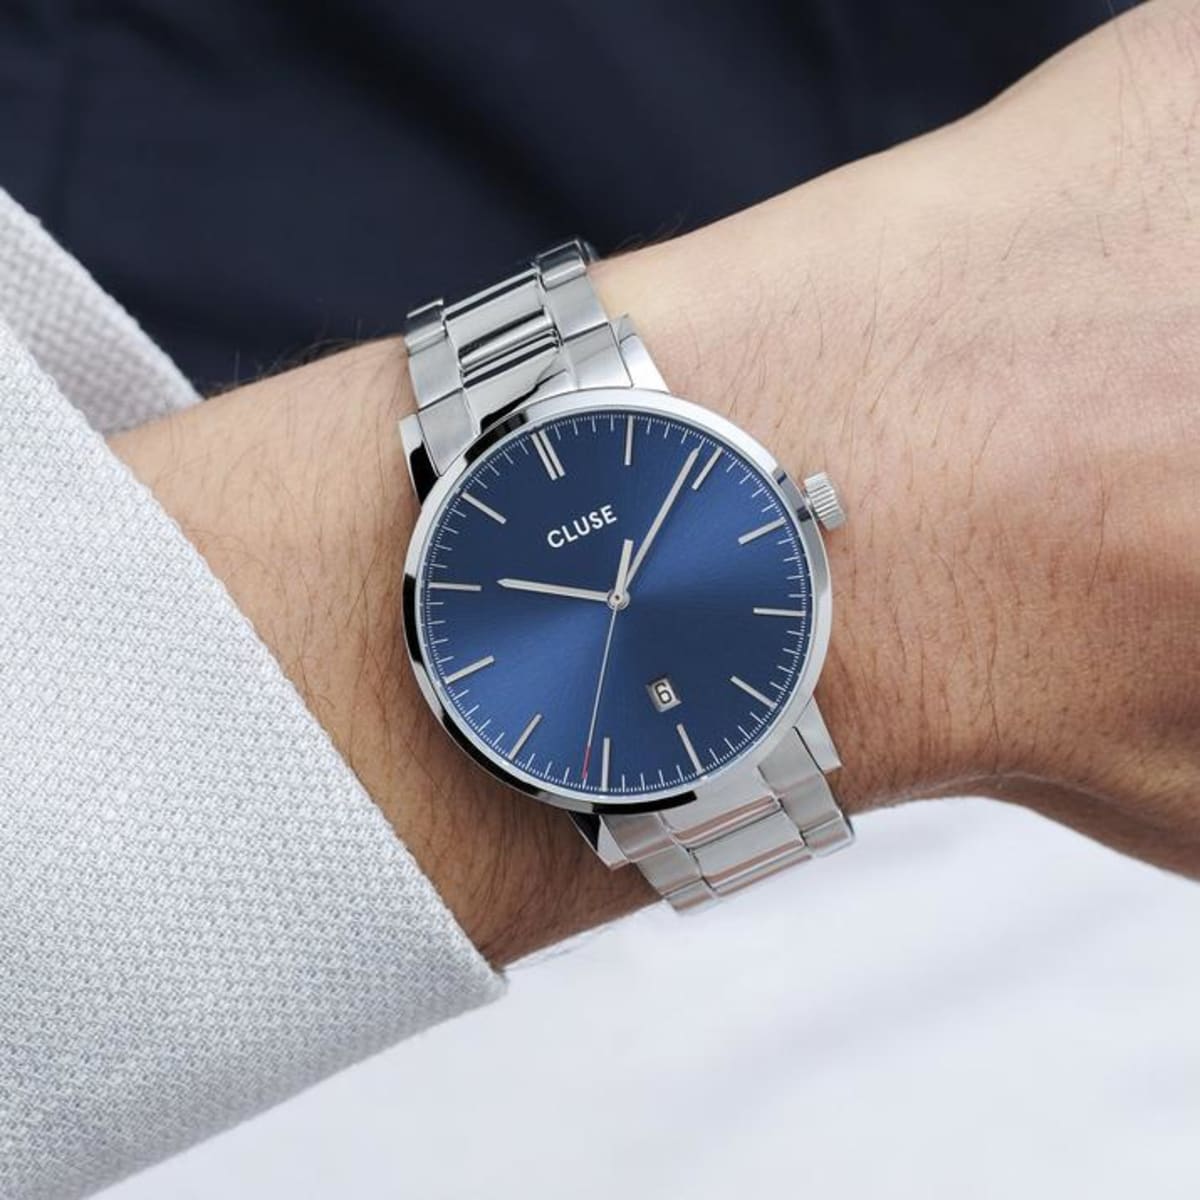 Are you looking for a watch that makes your wrist the center of attention? We've got you covered. This Aravis watch, with a striking blue sunray dial, has been designed for the man who enjoys sophisticated minimalism. No unnecessary details. Just exquisite styling and classic lines, finished with a centered date function. Your Aravis watch will stand the test of time with its high quality stainless steel case and integrated link bracelet. Water resistance: 5 ATM.